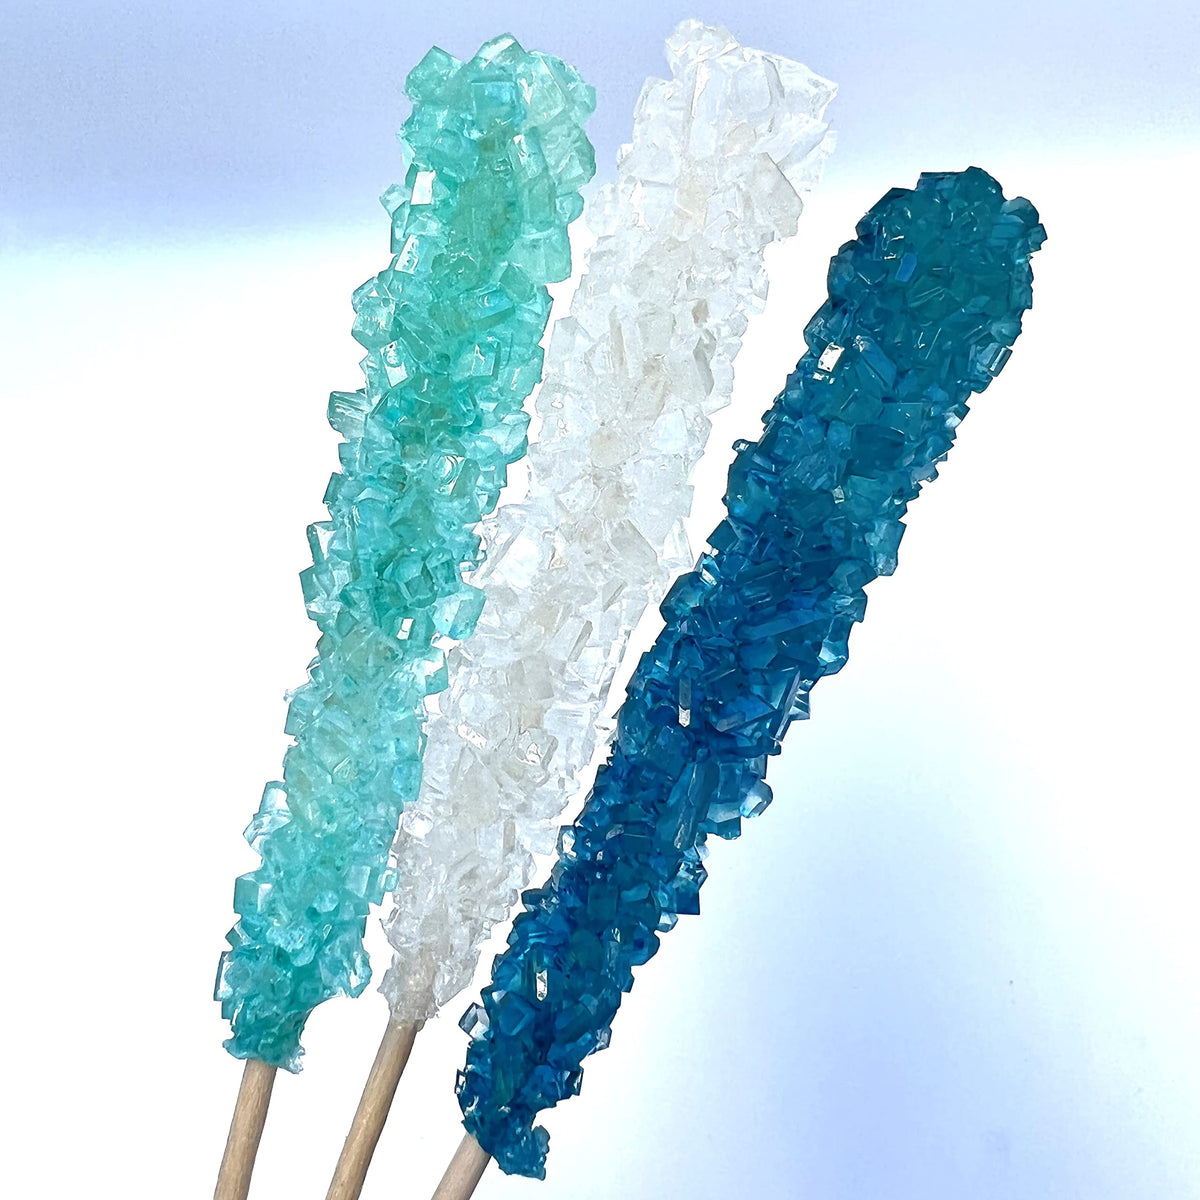 Classic Rock Candy Sticks, Sugar Rock Crystal Lollipops, Individually Wrapped (Frozen Ice (Blue, White & Light Blue), Pack of 18)